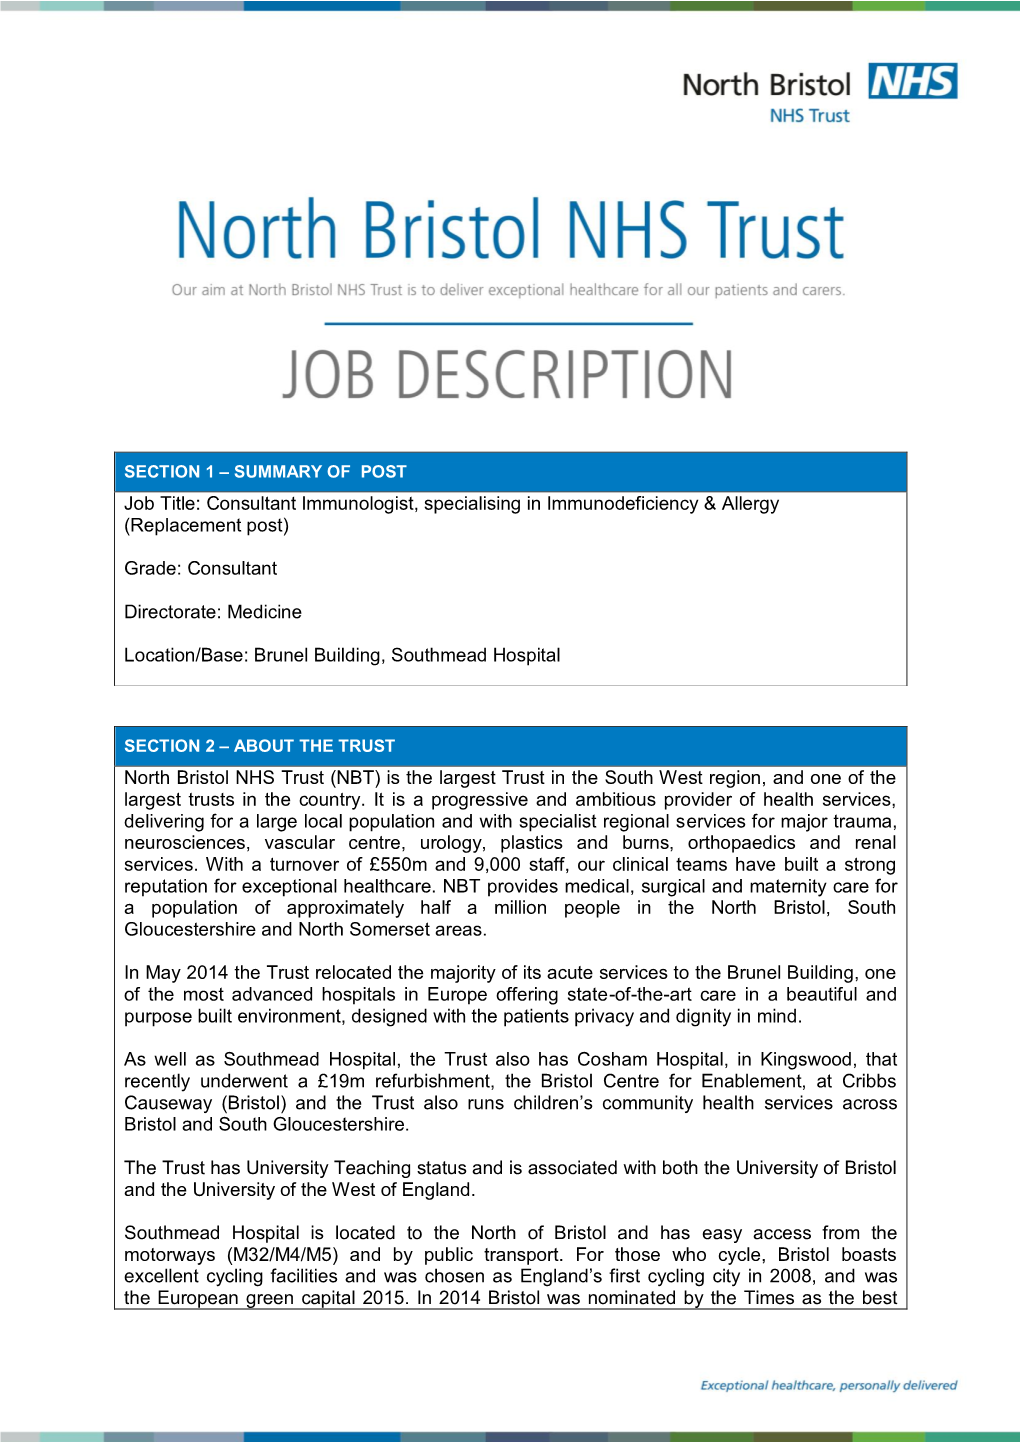 North Bristol NHS Trust (NBT) Is the Largest Trust in the South West Region, and One of the Largest Trusts in the Country